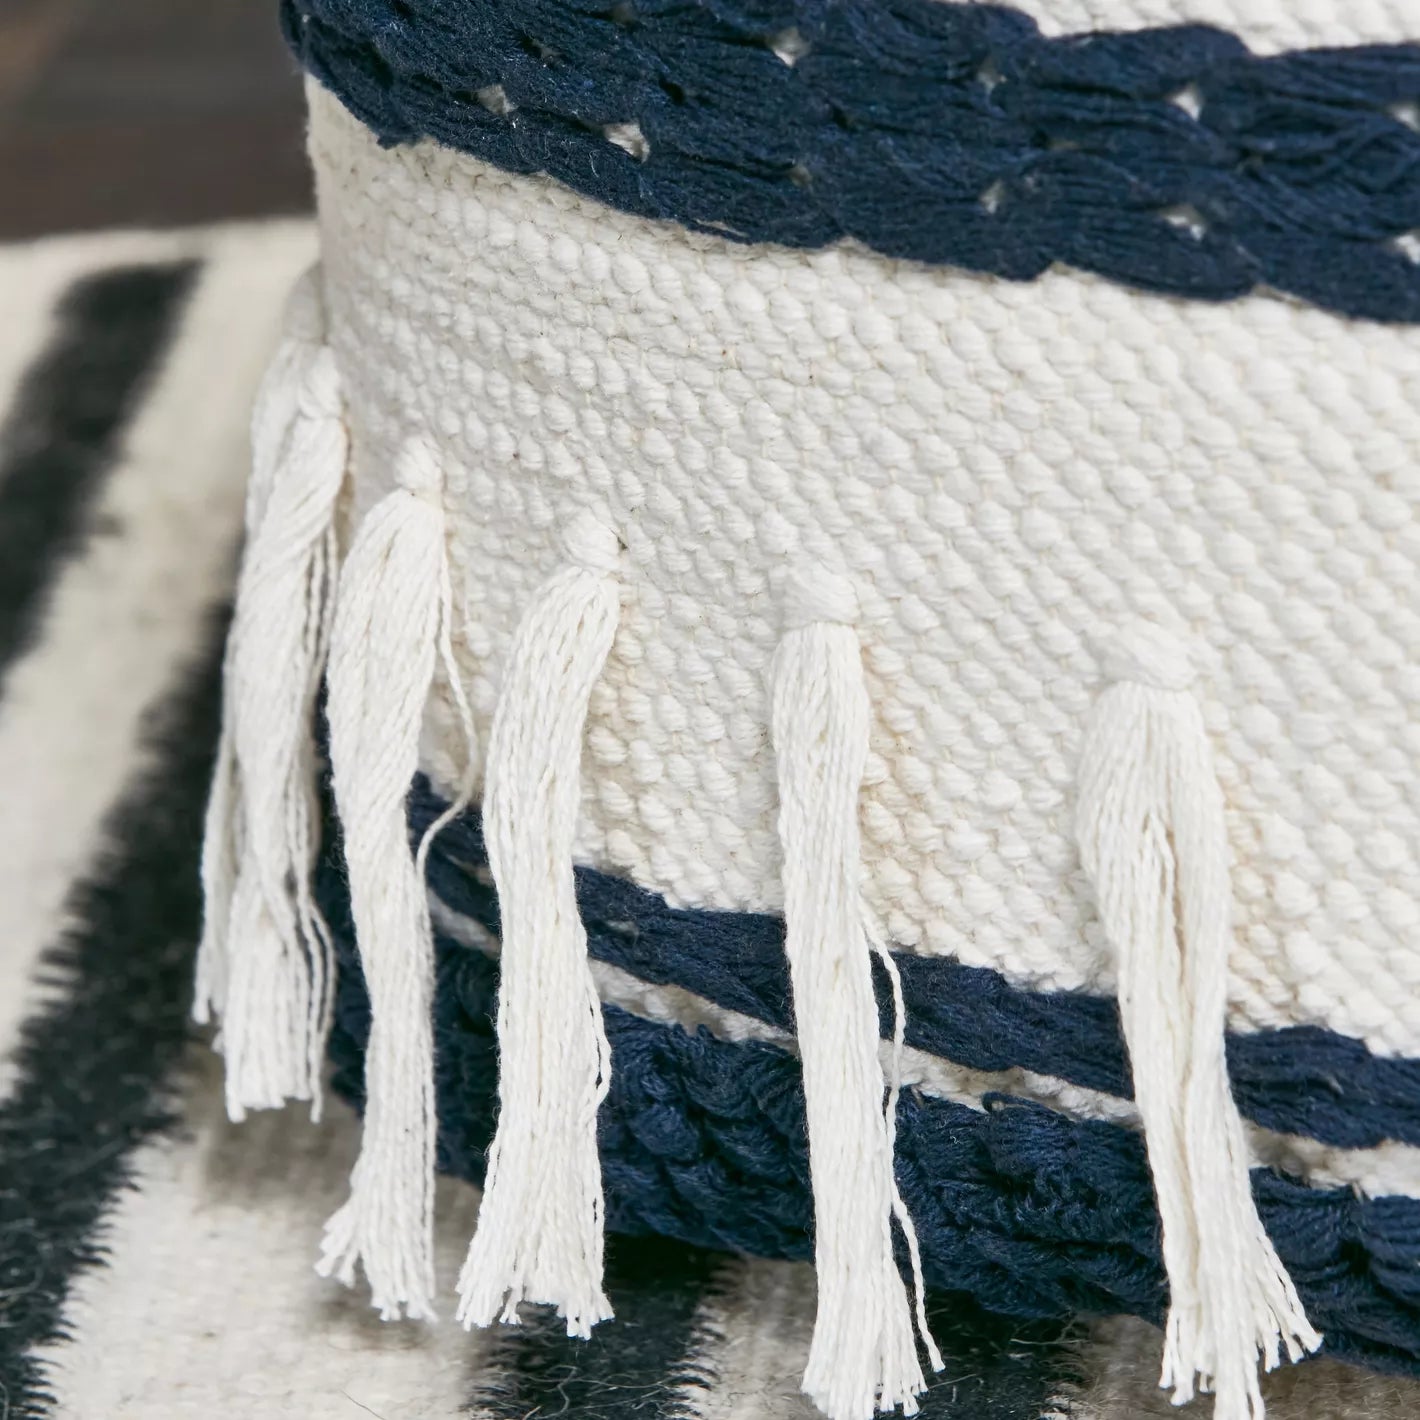 Harlow Cable Stripe Pouffe with Tassels - 40x40 cm